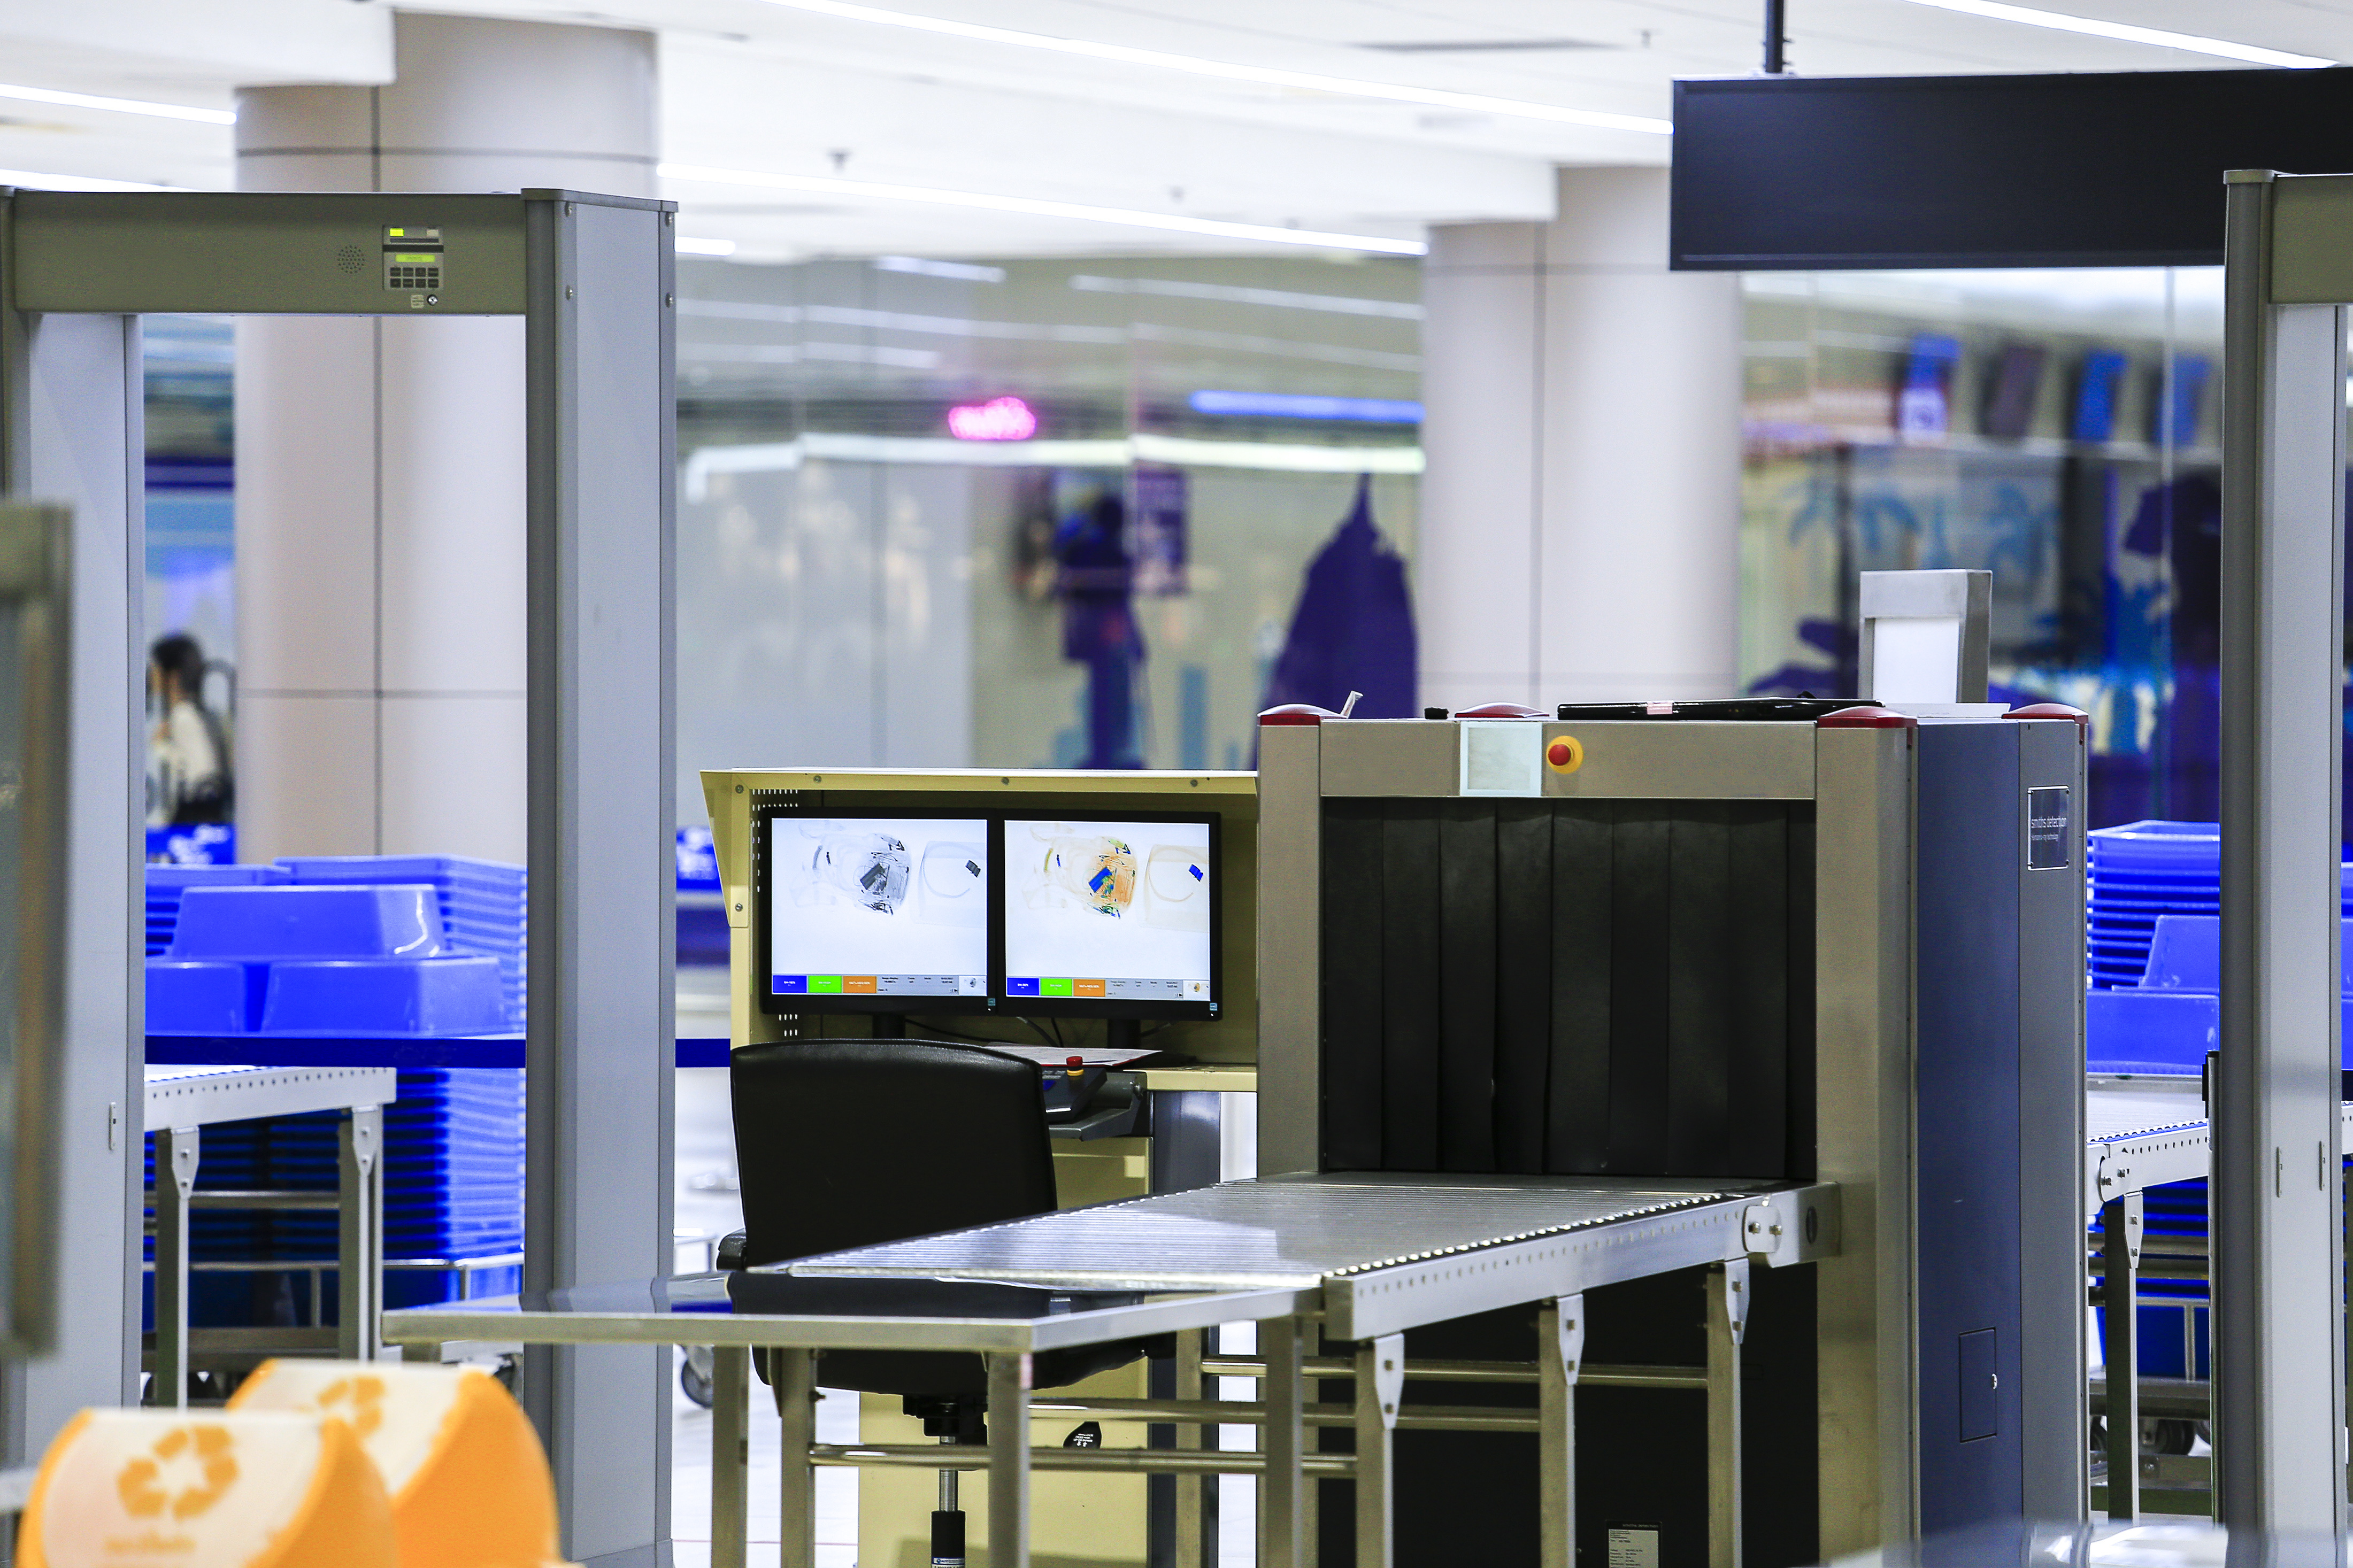 Security check with body scanner at the airport